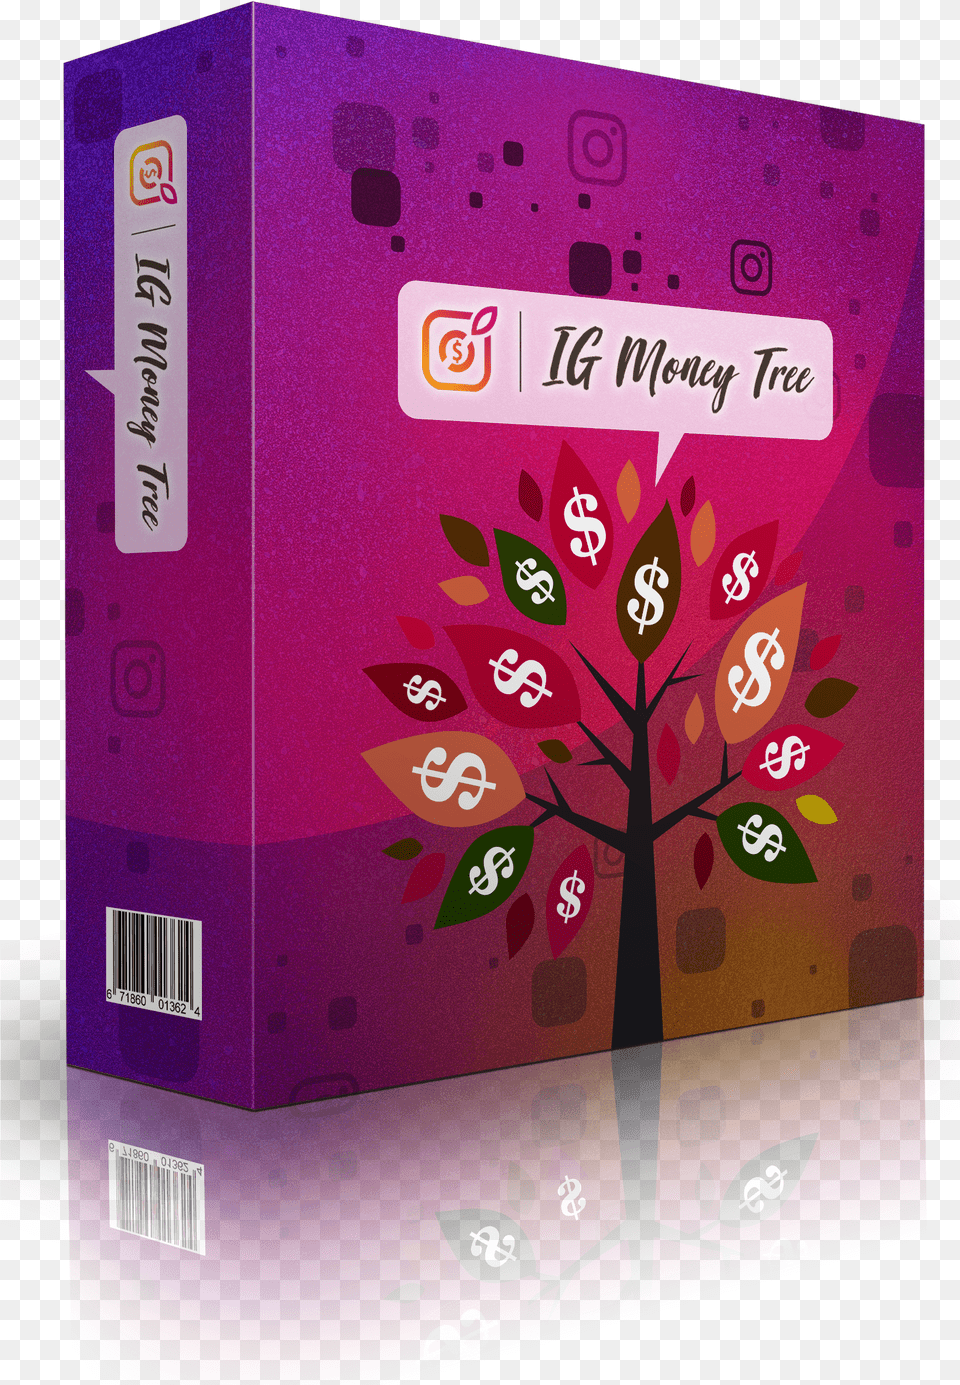 Ig Money Tree Ig Money Tree Review, Electronics, Mobile Phone, Phone, File Binder Free Png Download